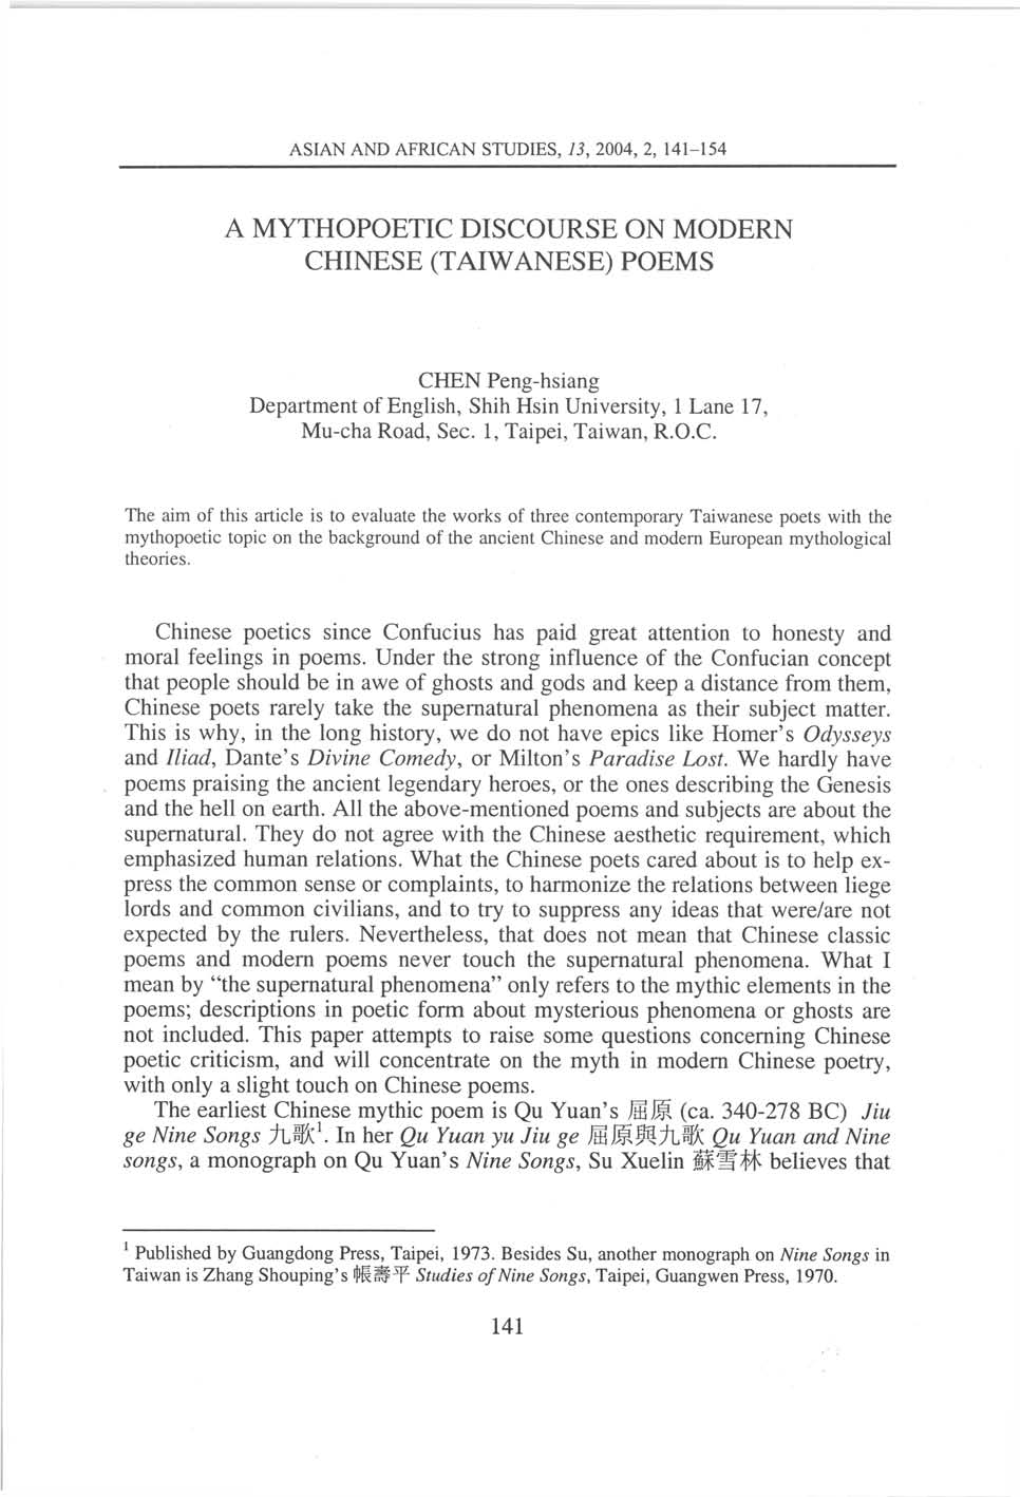 A Mythopoetic Discourse on Modern Chinese (Taiwanese) Poems